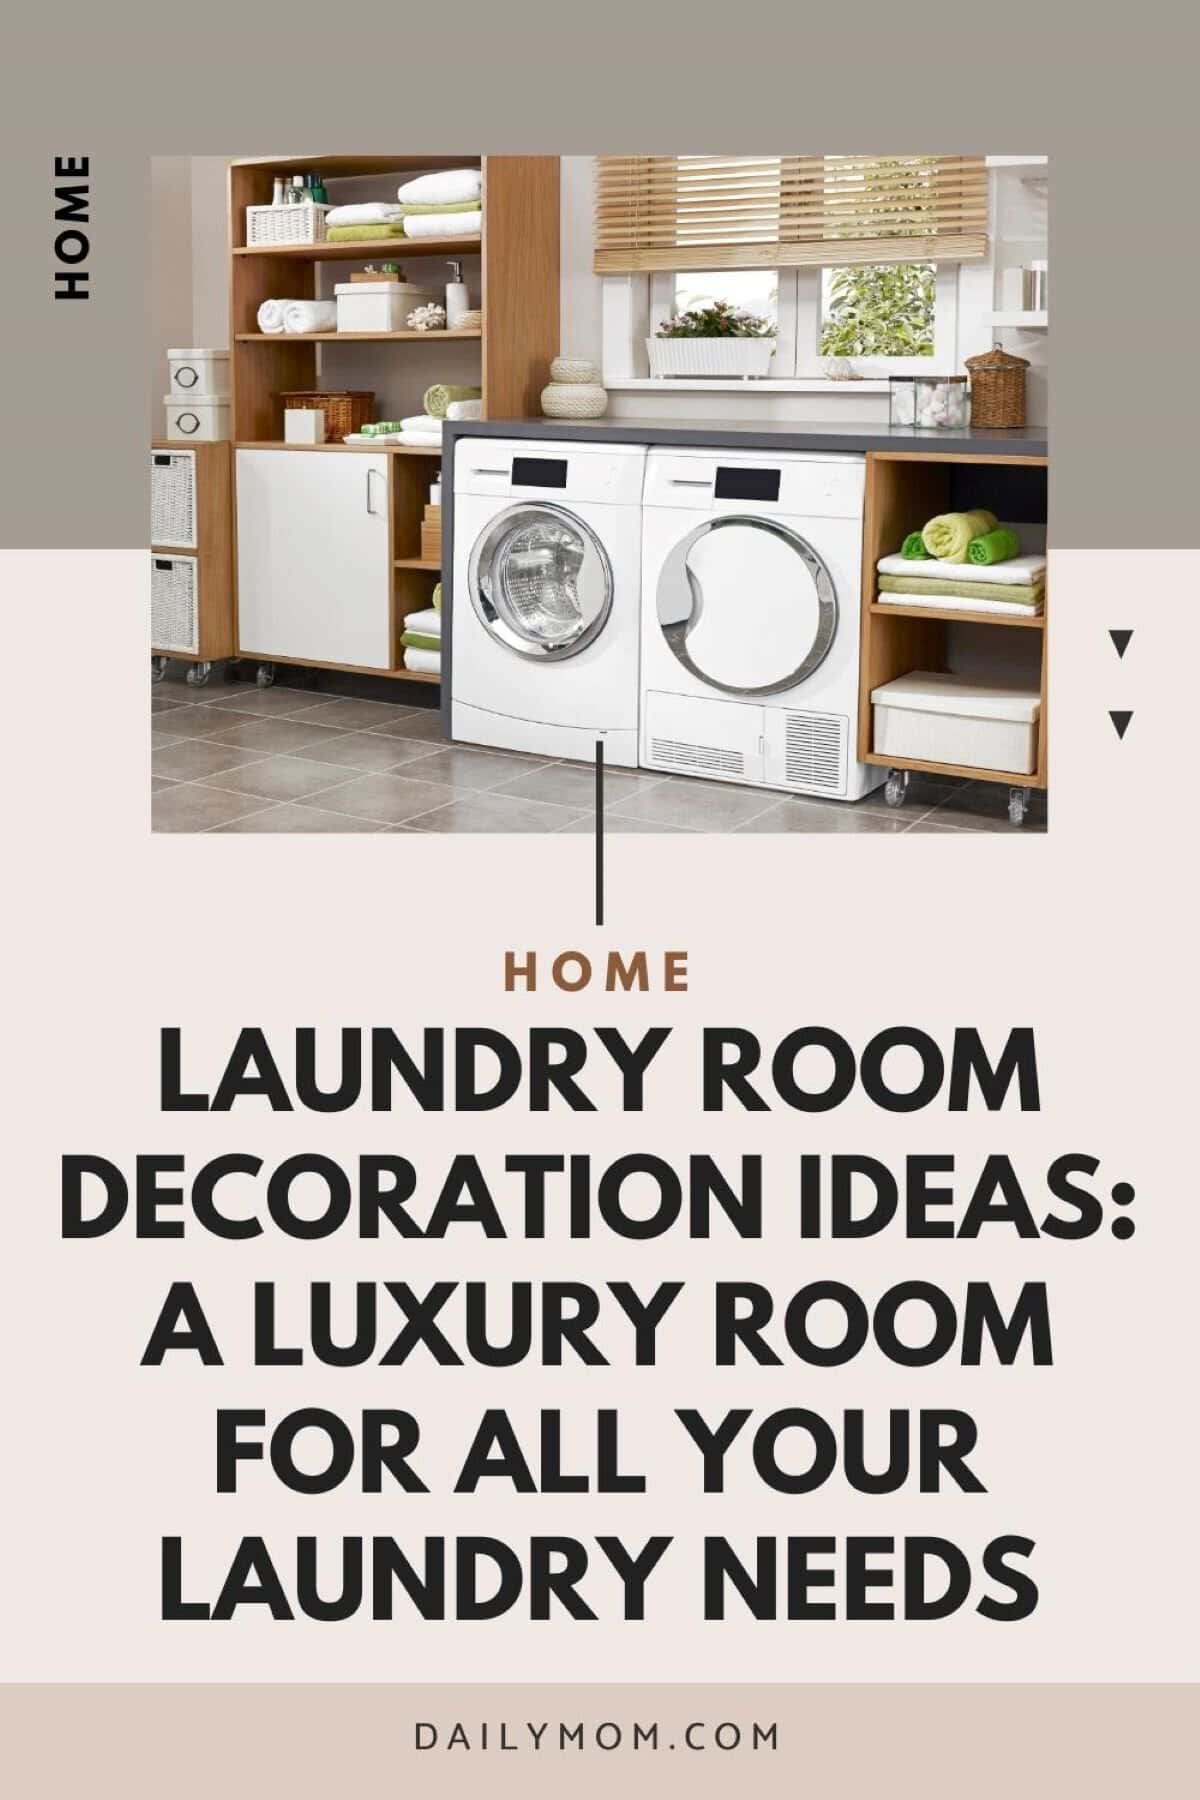 Laundry Room Decoration Ideas: 5 Essential Elements To Design The Luxury Laundry Room You Didn'T Know You Needed 10 Daily Mom, Magazine For Families